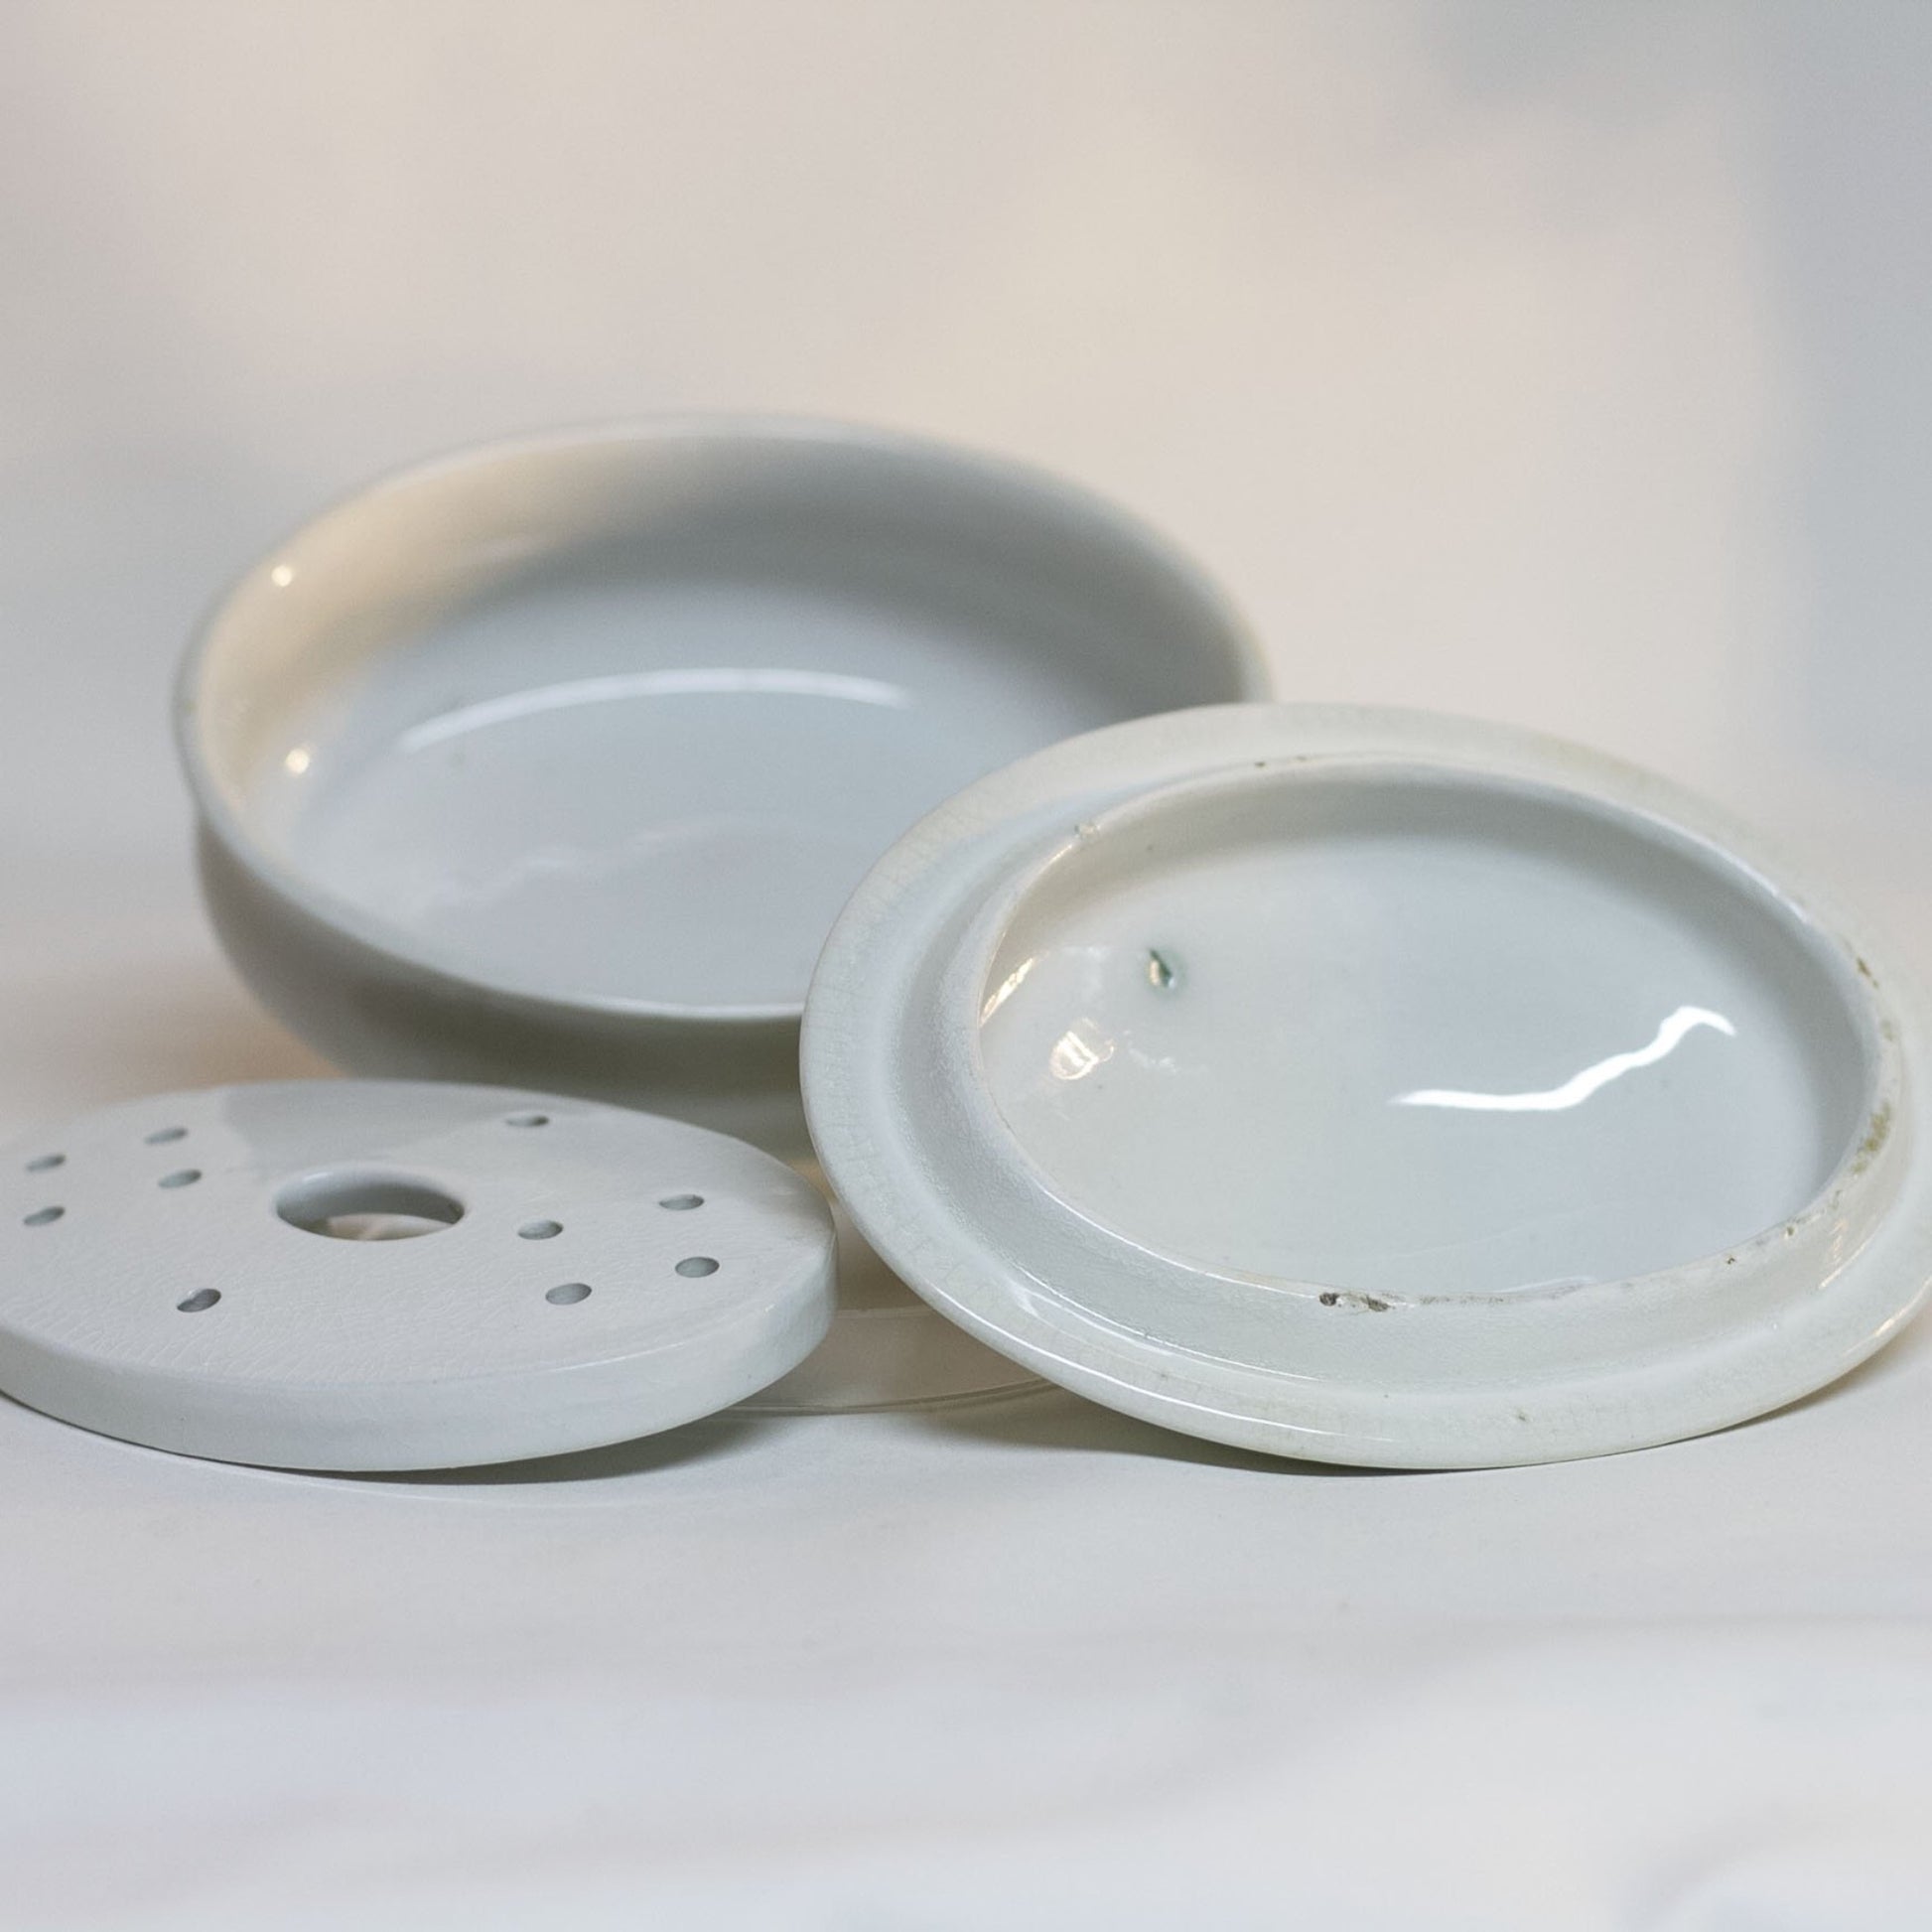 Gorgeous white antique IRONSTONE THREE-PIECE SOAP DISH made by MELLOR, TAYLOR AND COMPANY of Burslem Stoke-on-Tent in England. Set is in the shape of a small oval tureen and complete, including the drain and lid. Stamped dating the piece to between 1880-1904. Some staining, no chips.